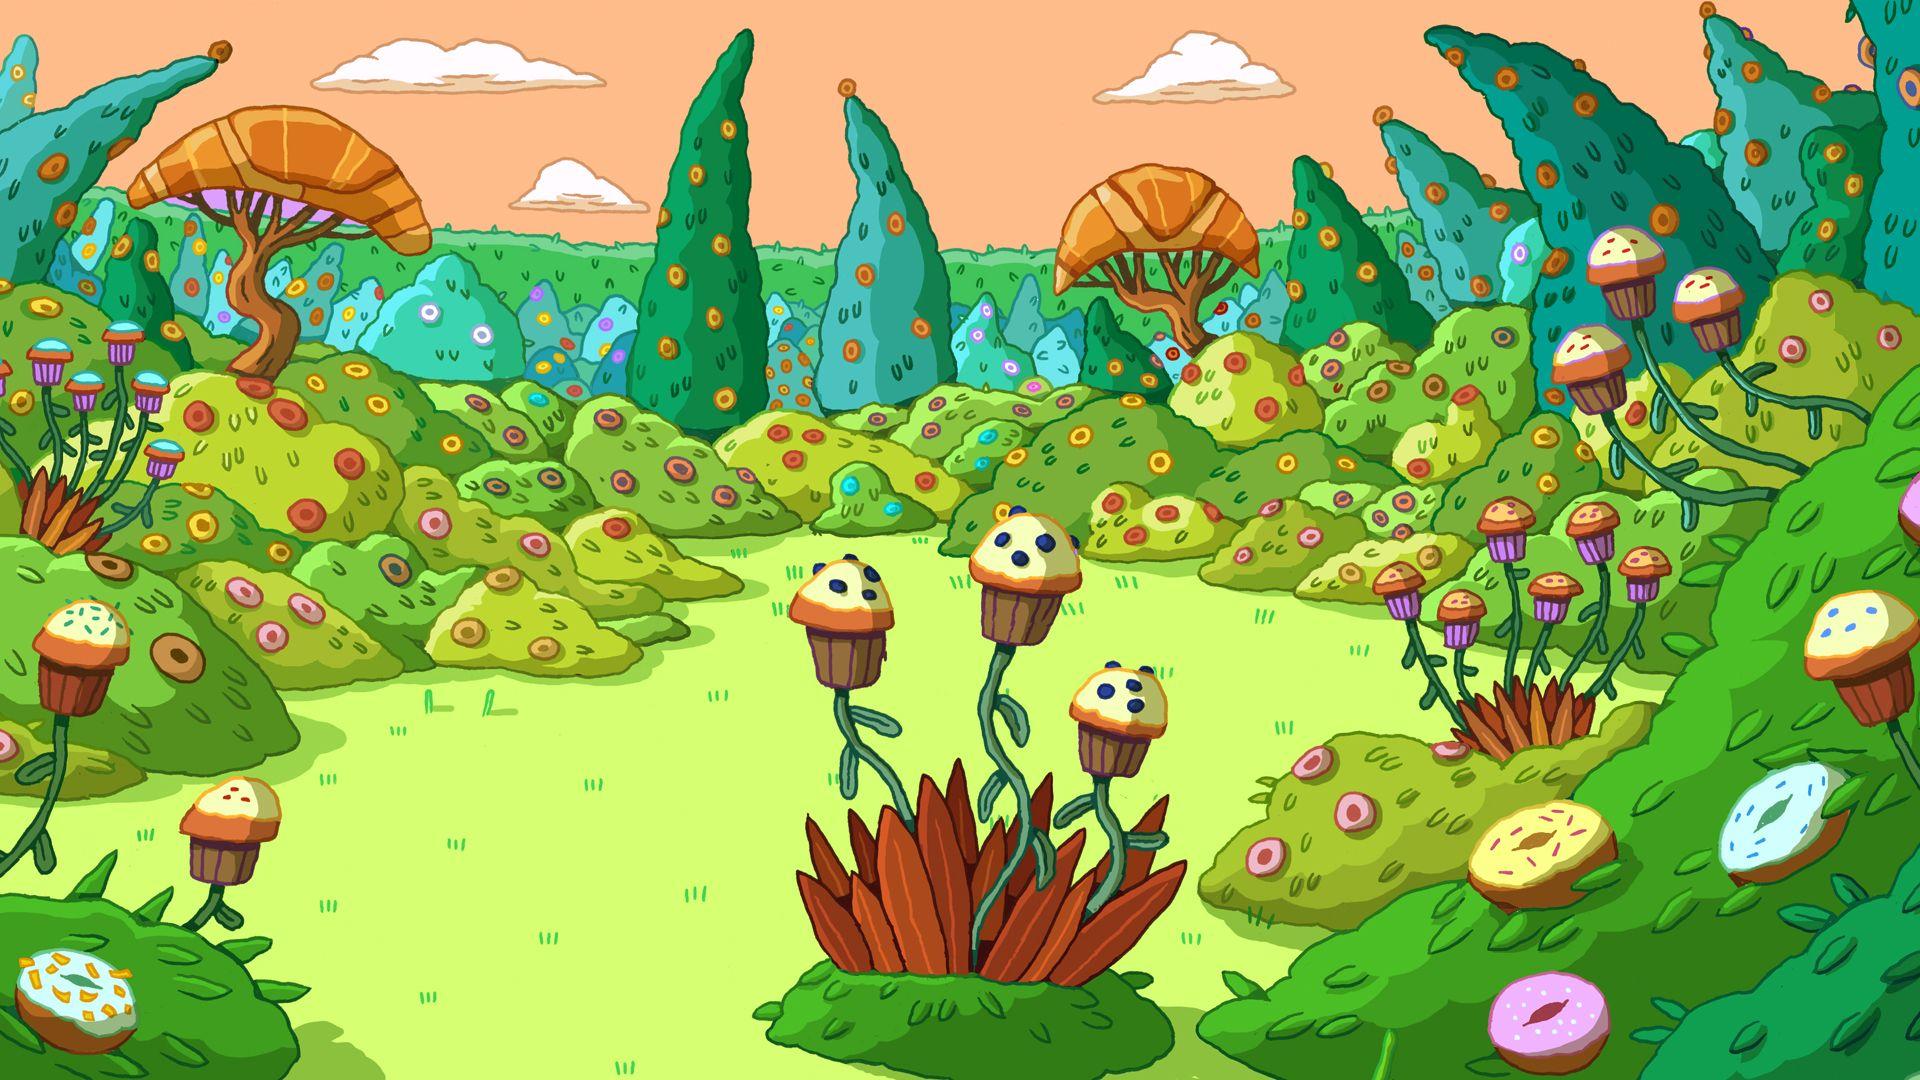 adventure time background scenery 6. Background Check All